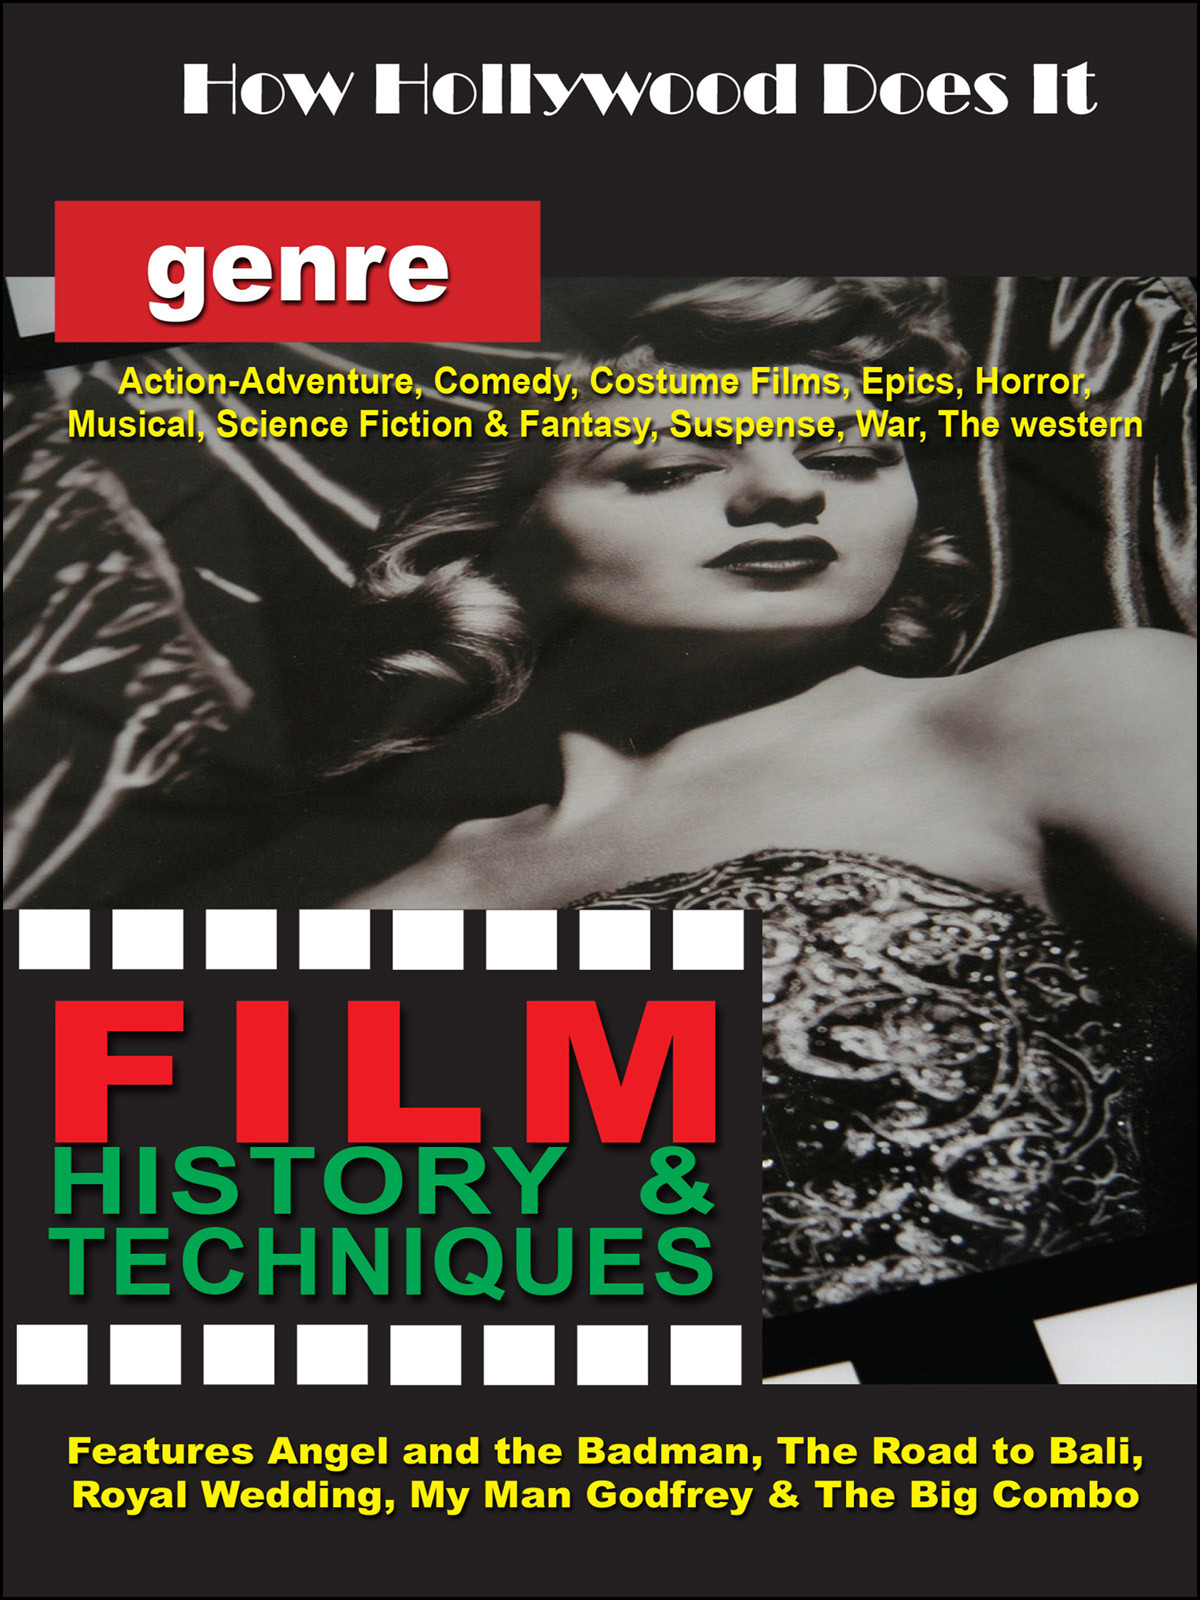 F2716 - How Hollywood Does It - Film History & Techniques of Genre